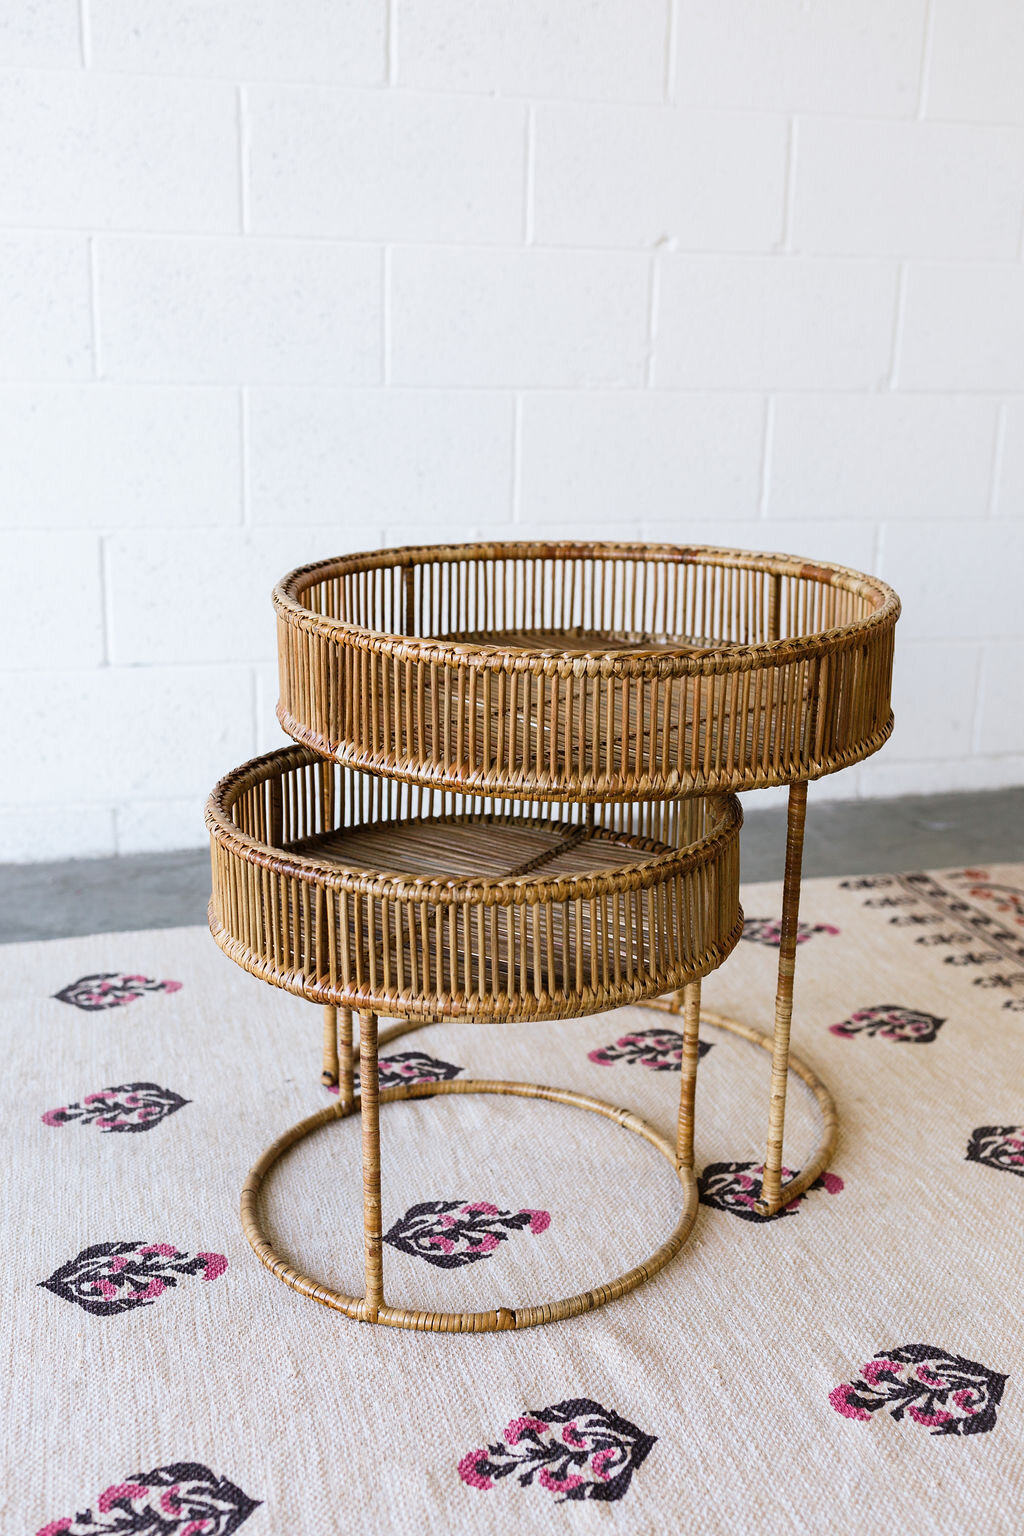 Delilah Bamboo Nesting Tables 5 - Provenance Vintage Rentals Specialty Rentals Near Me Los Angeles Event Rentals Near Me Wedding Lounge Rentals Party Rentals Vintage Lounge Modern Lounge Modern Furniture Rentals near Me.jpg